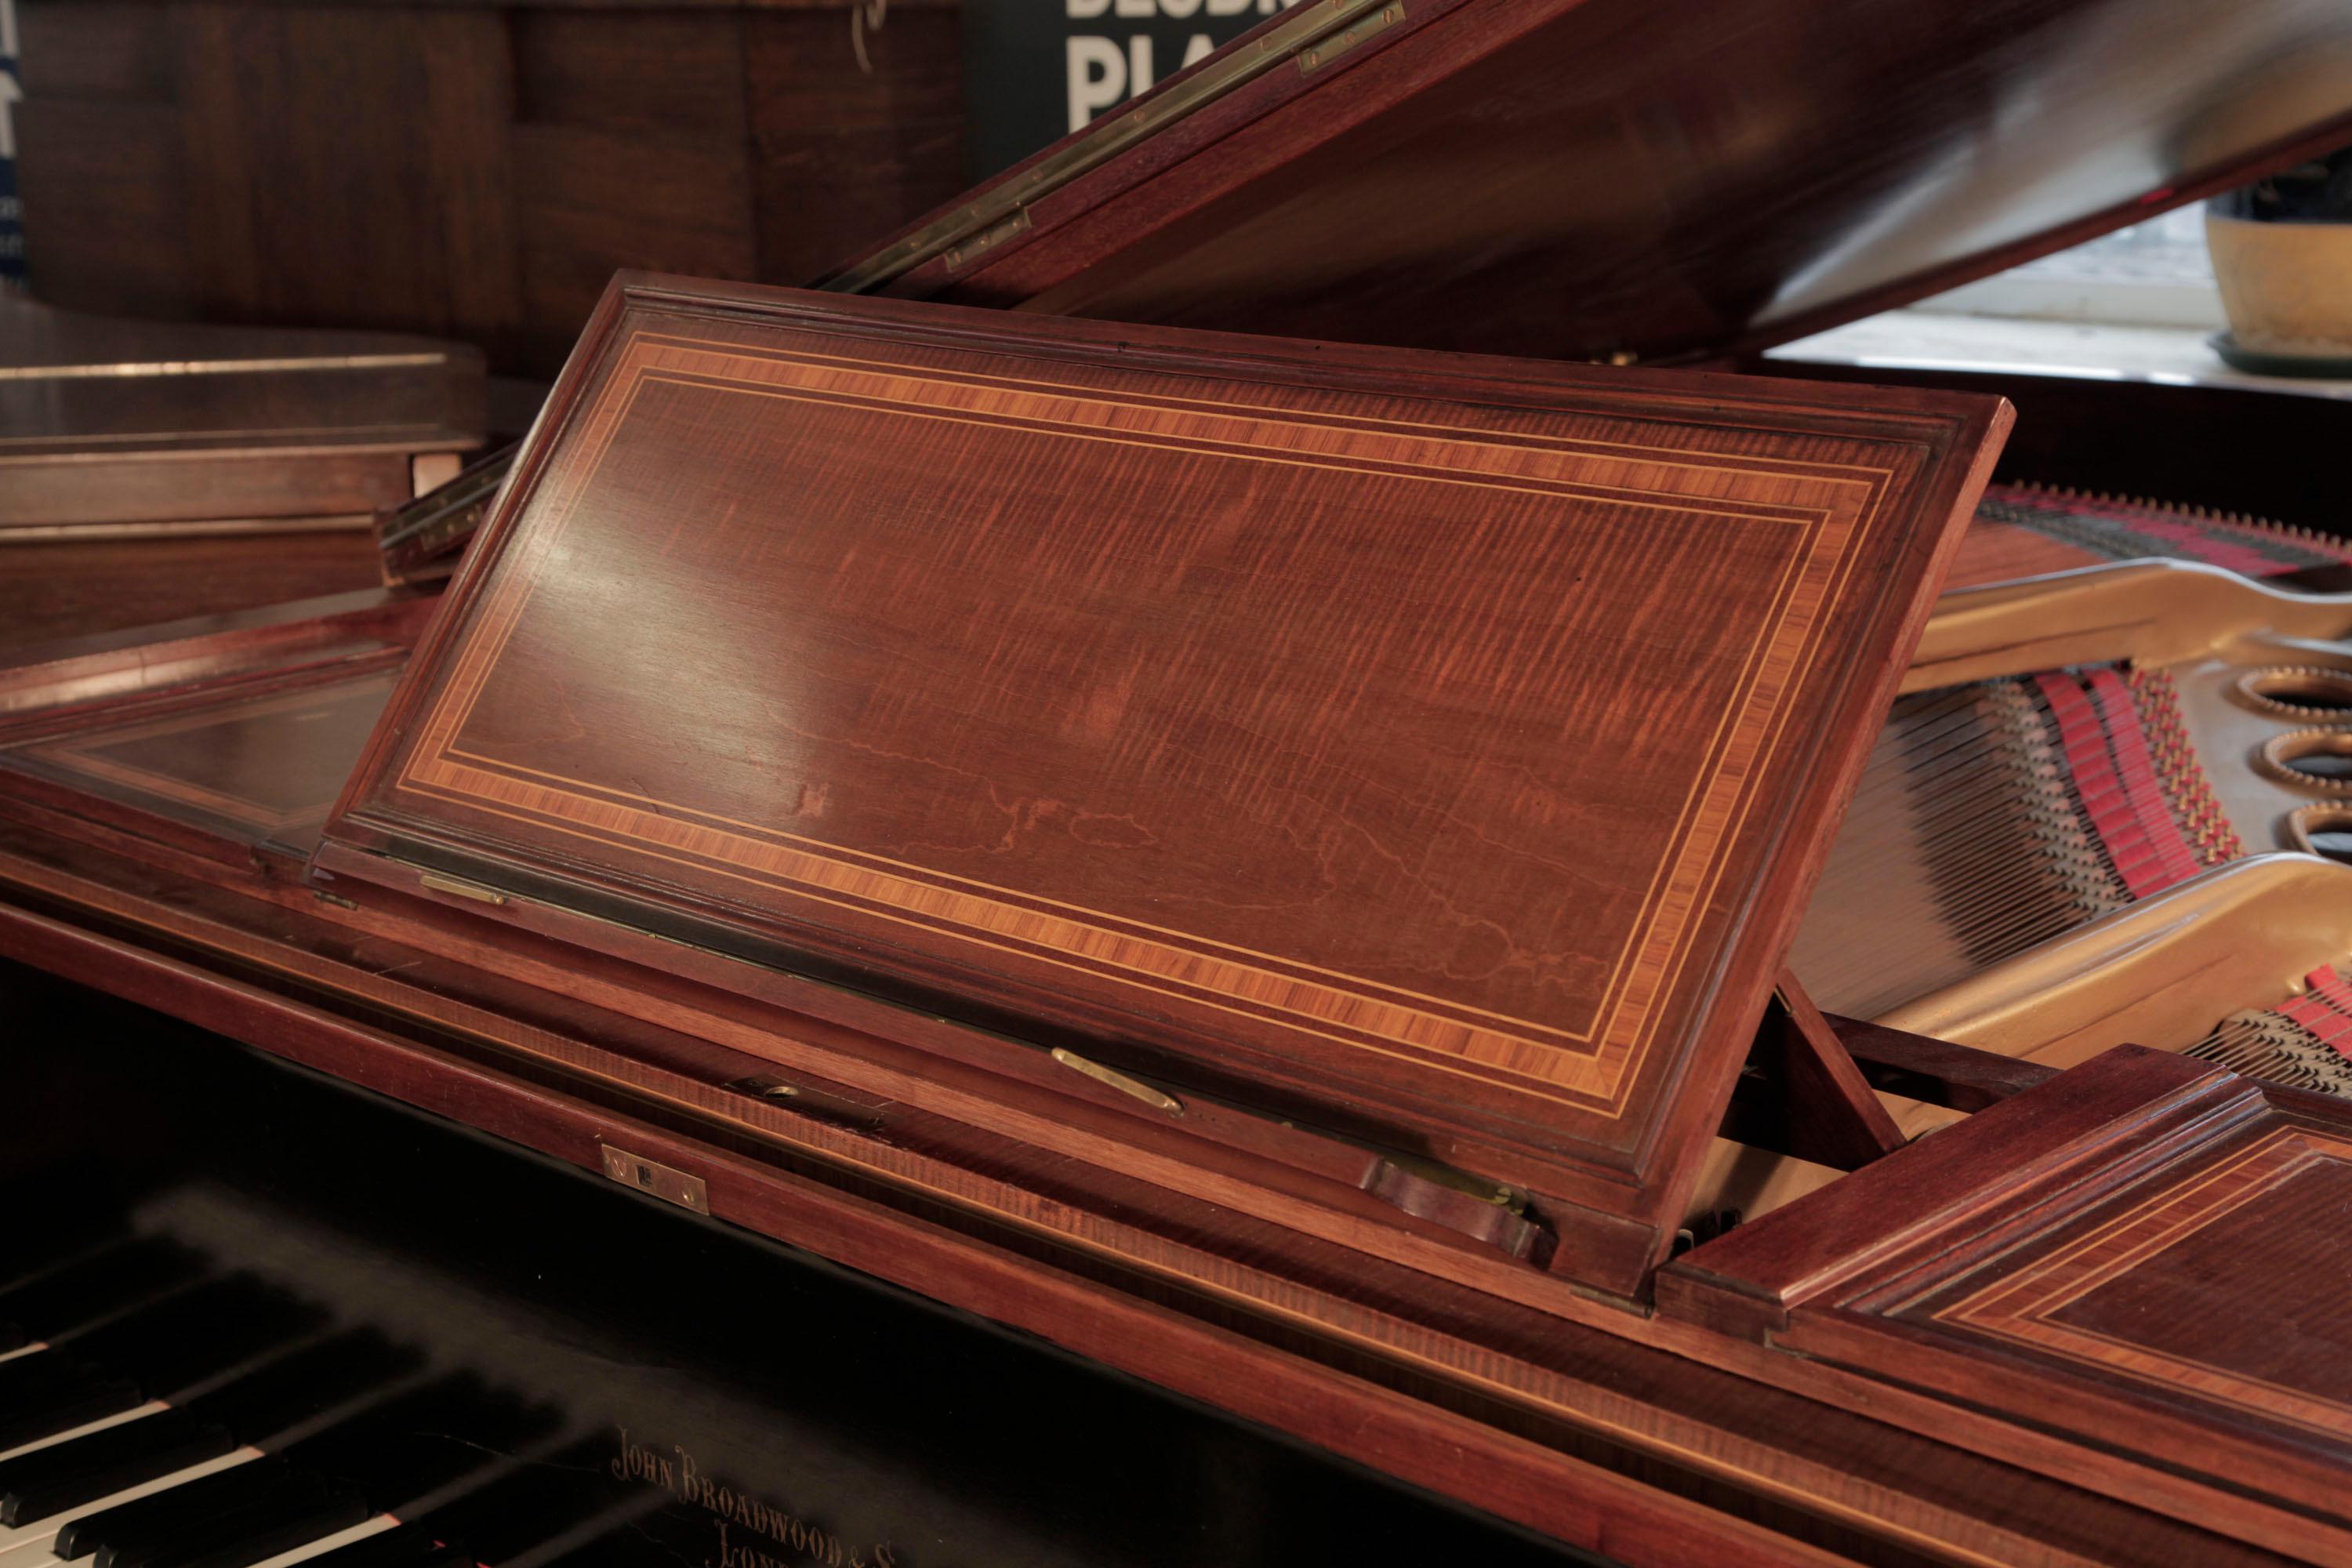 An 1894, Broadwood grand piano with a polished, mahogany case. 
Piano has tapered, fluted gate legs with ionic capitals attached with a cross stretcher that incorporates the piano lyre. The leg architrave features carved circular strapwork, a motif